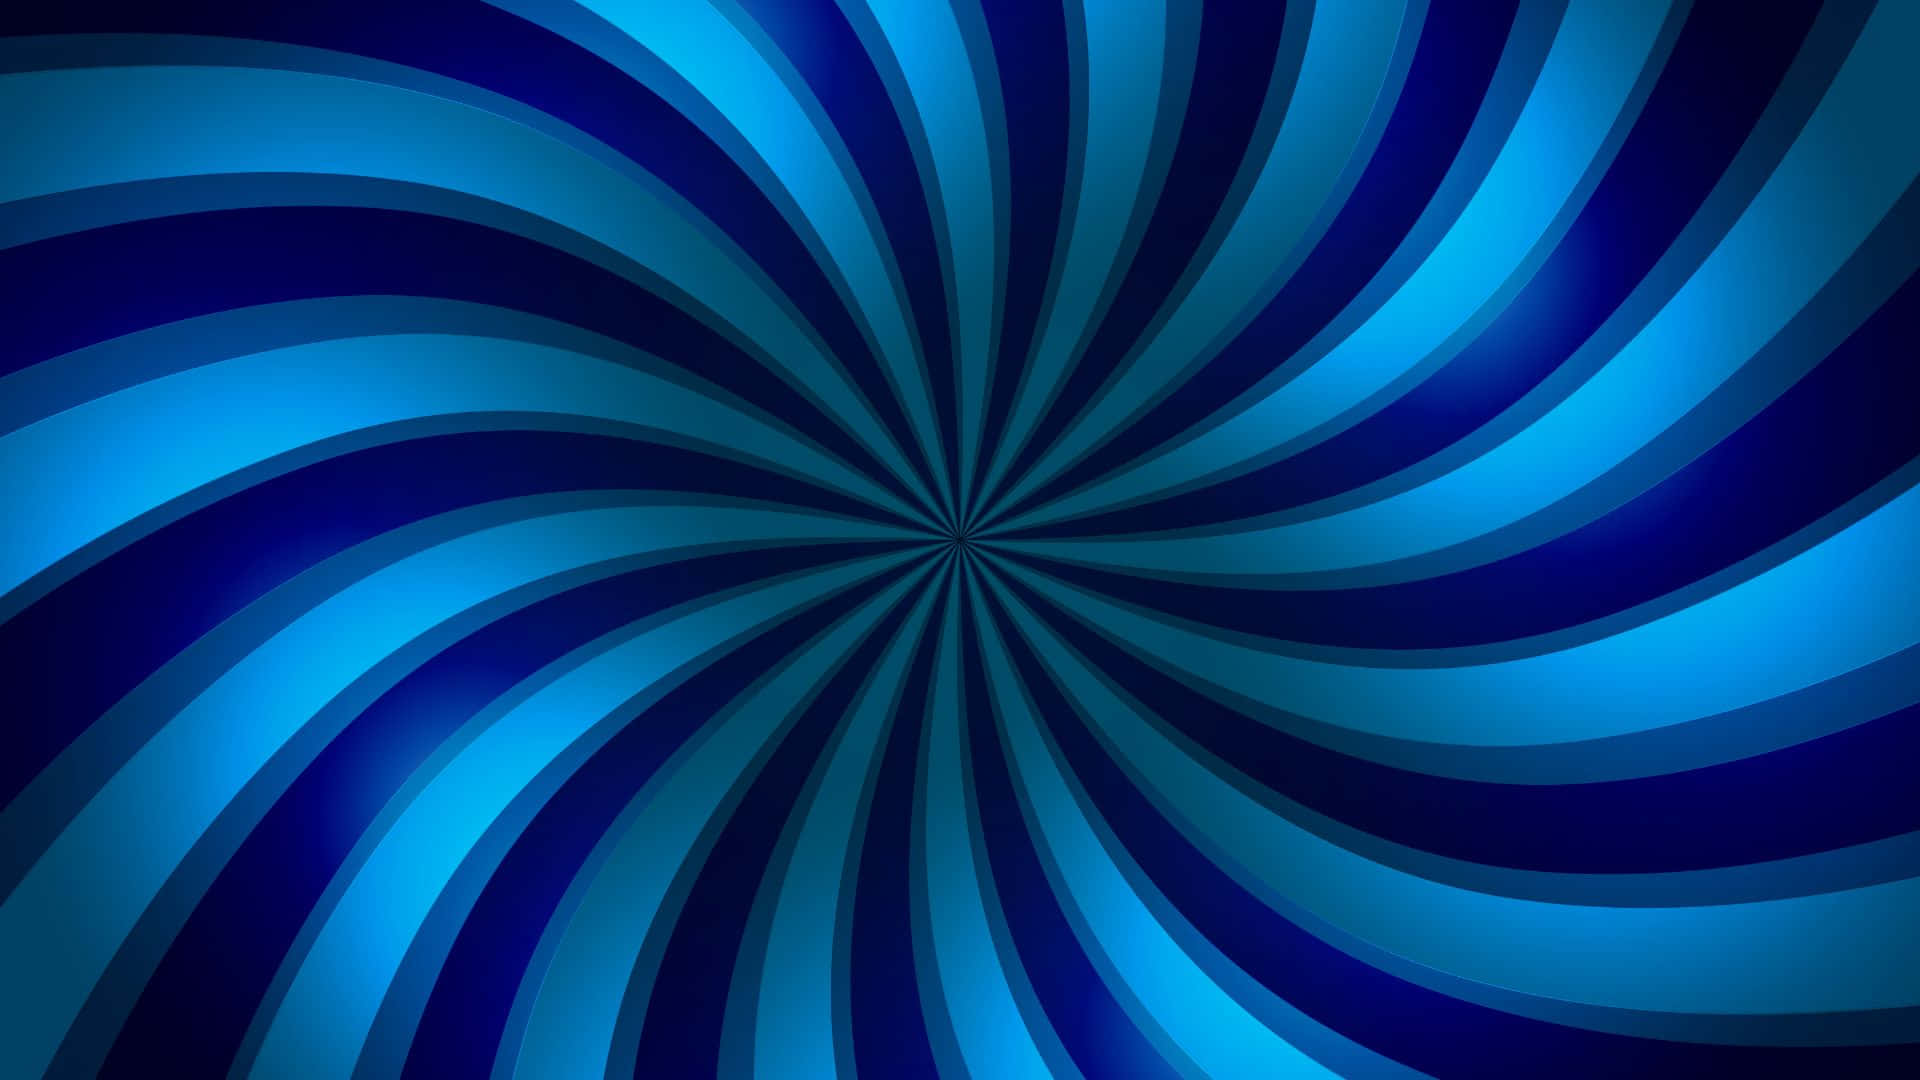 Blue Swirl Background With Black Lines